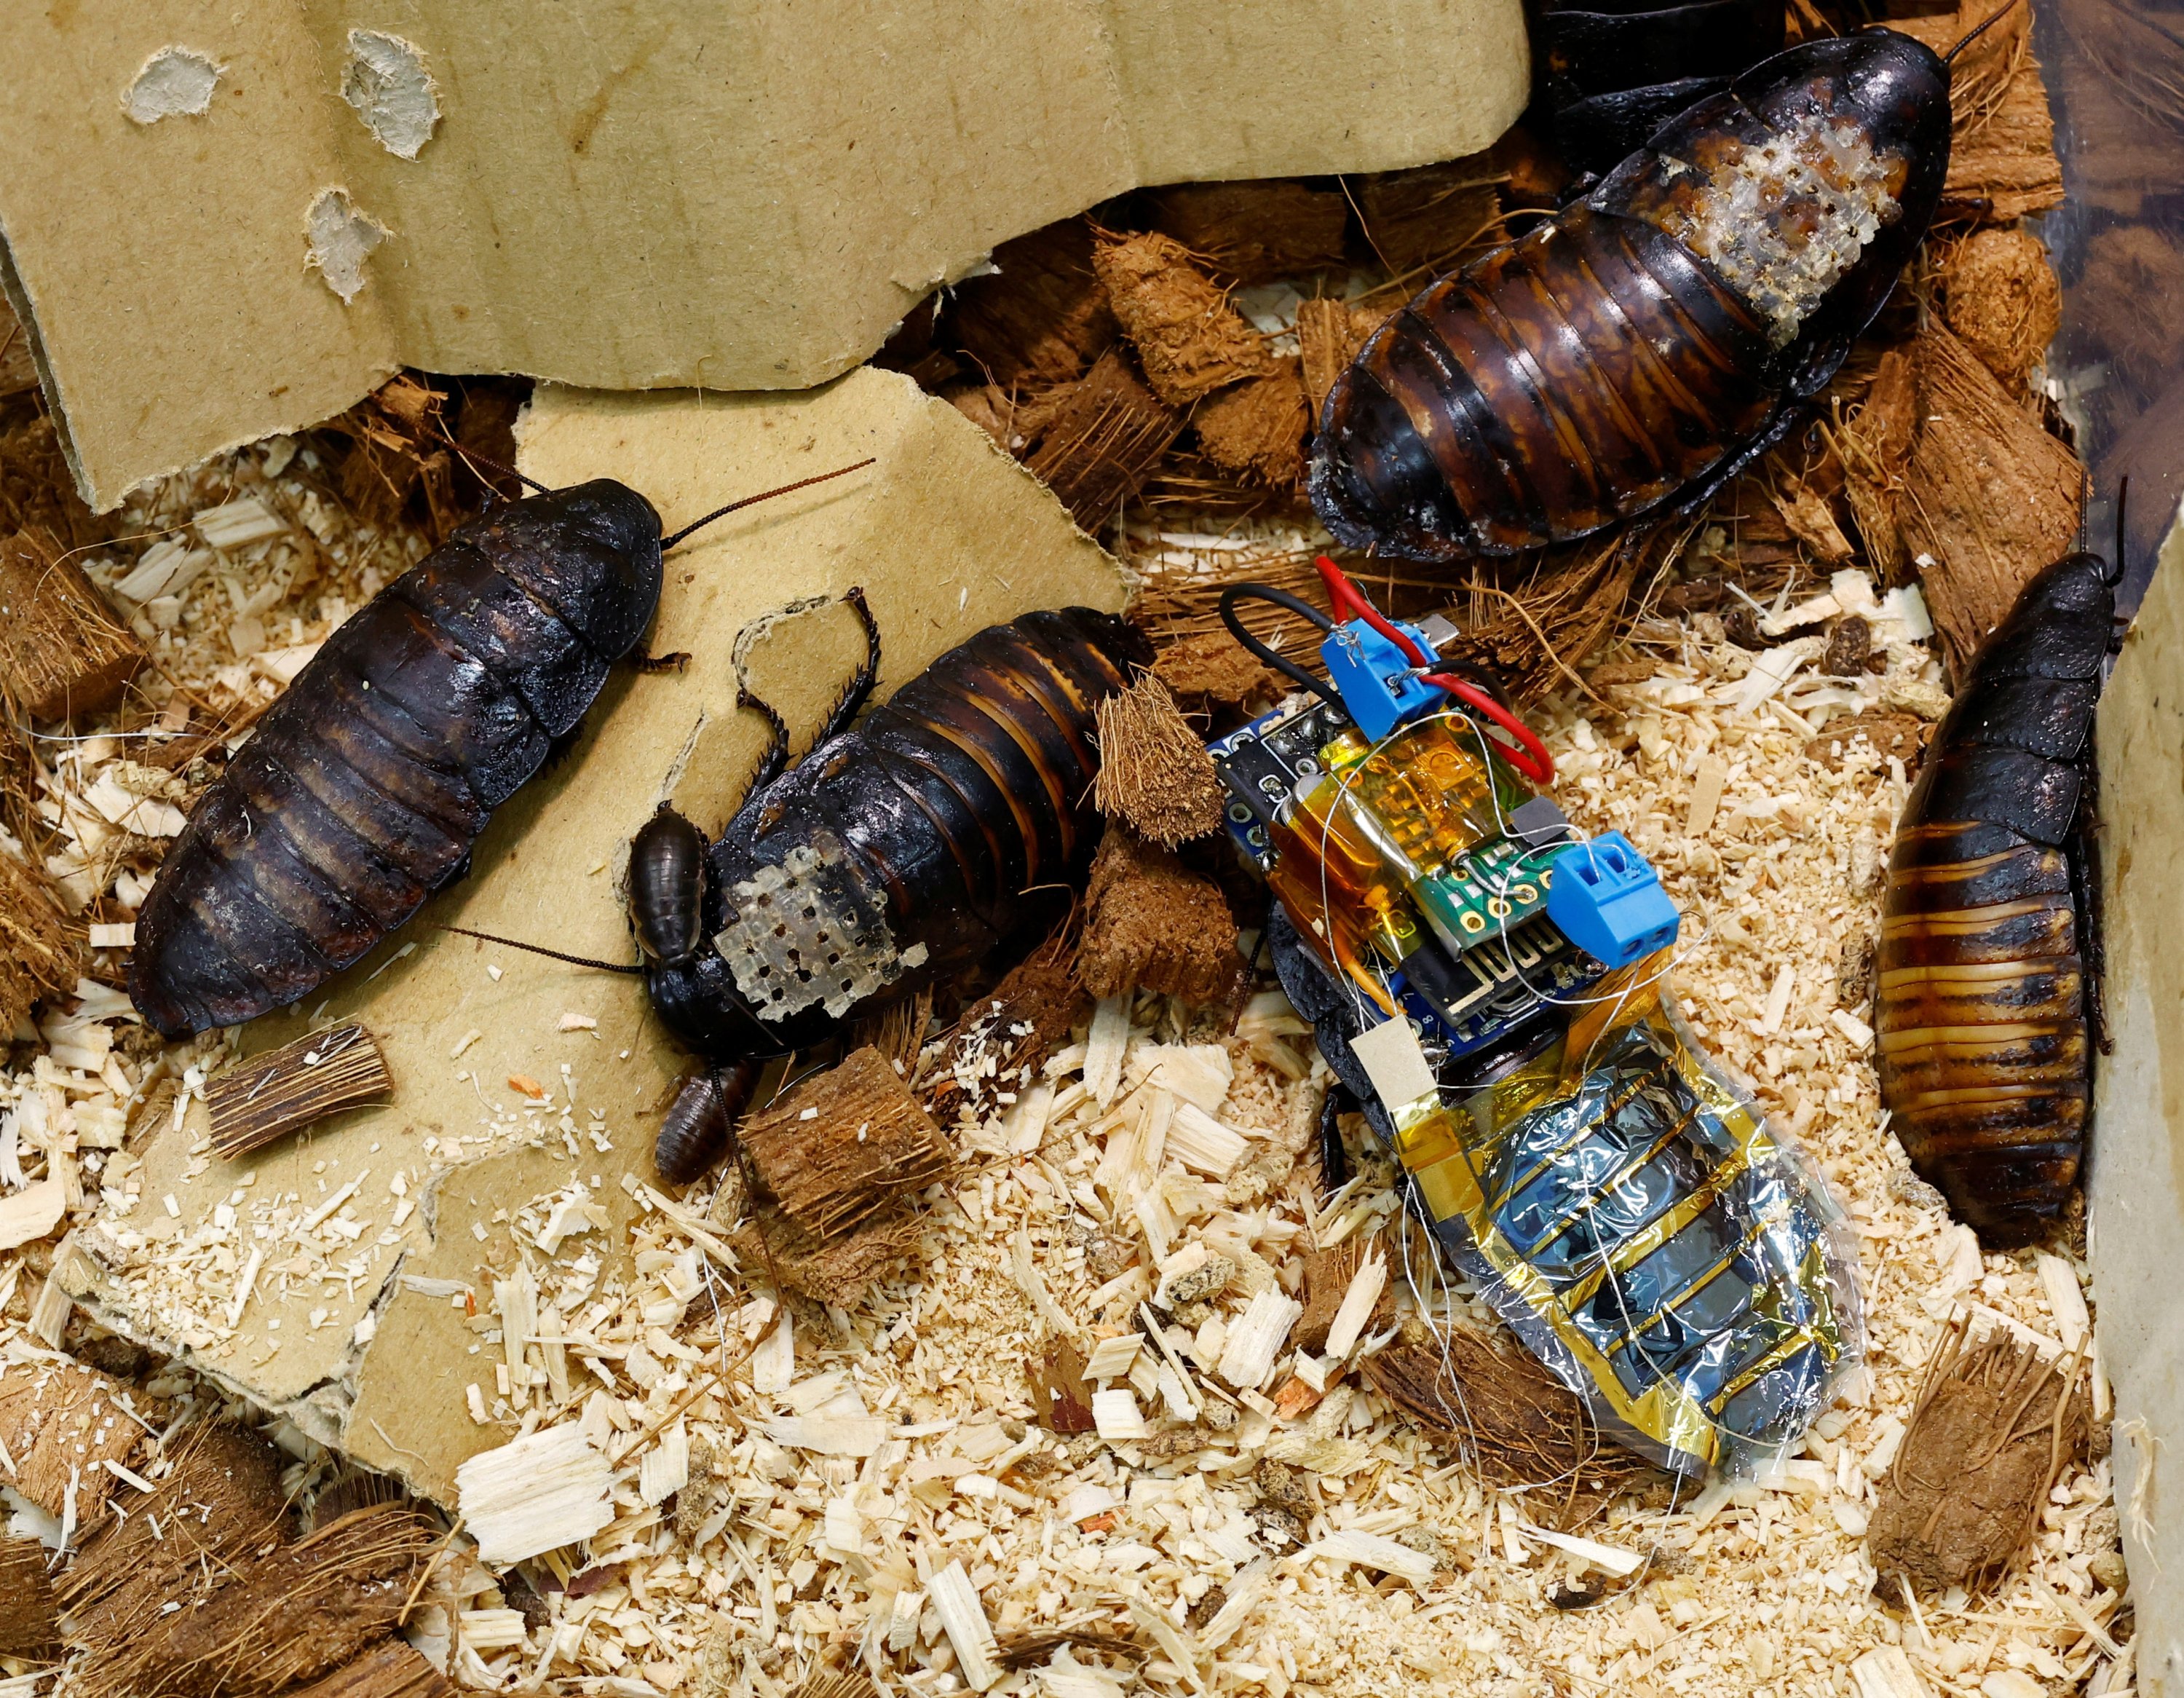 A Madagascar hissing cockroach, mounted with a 